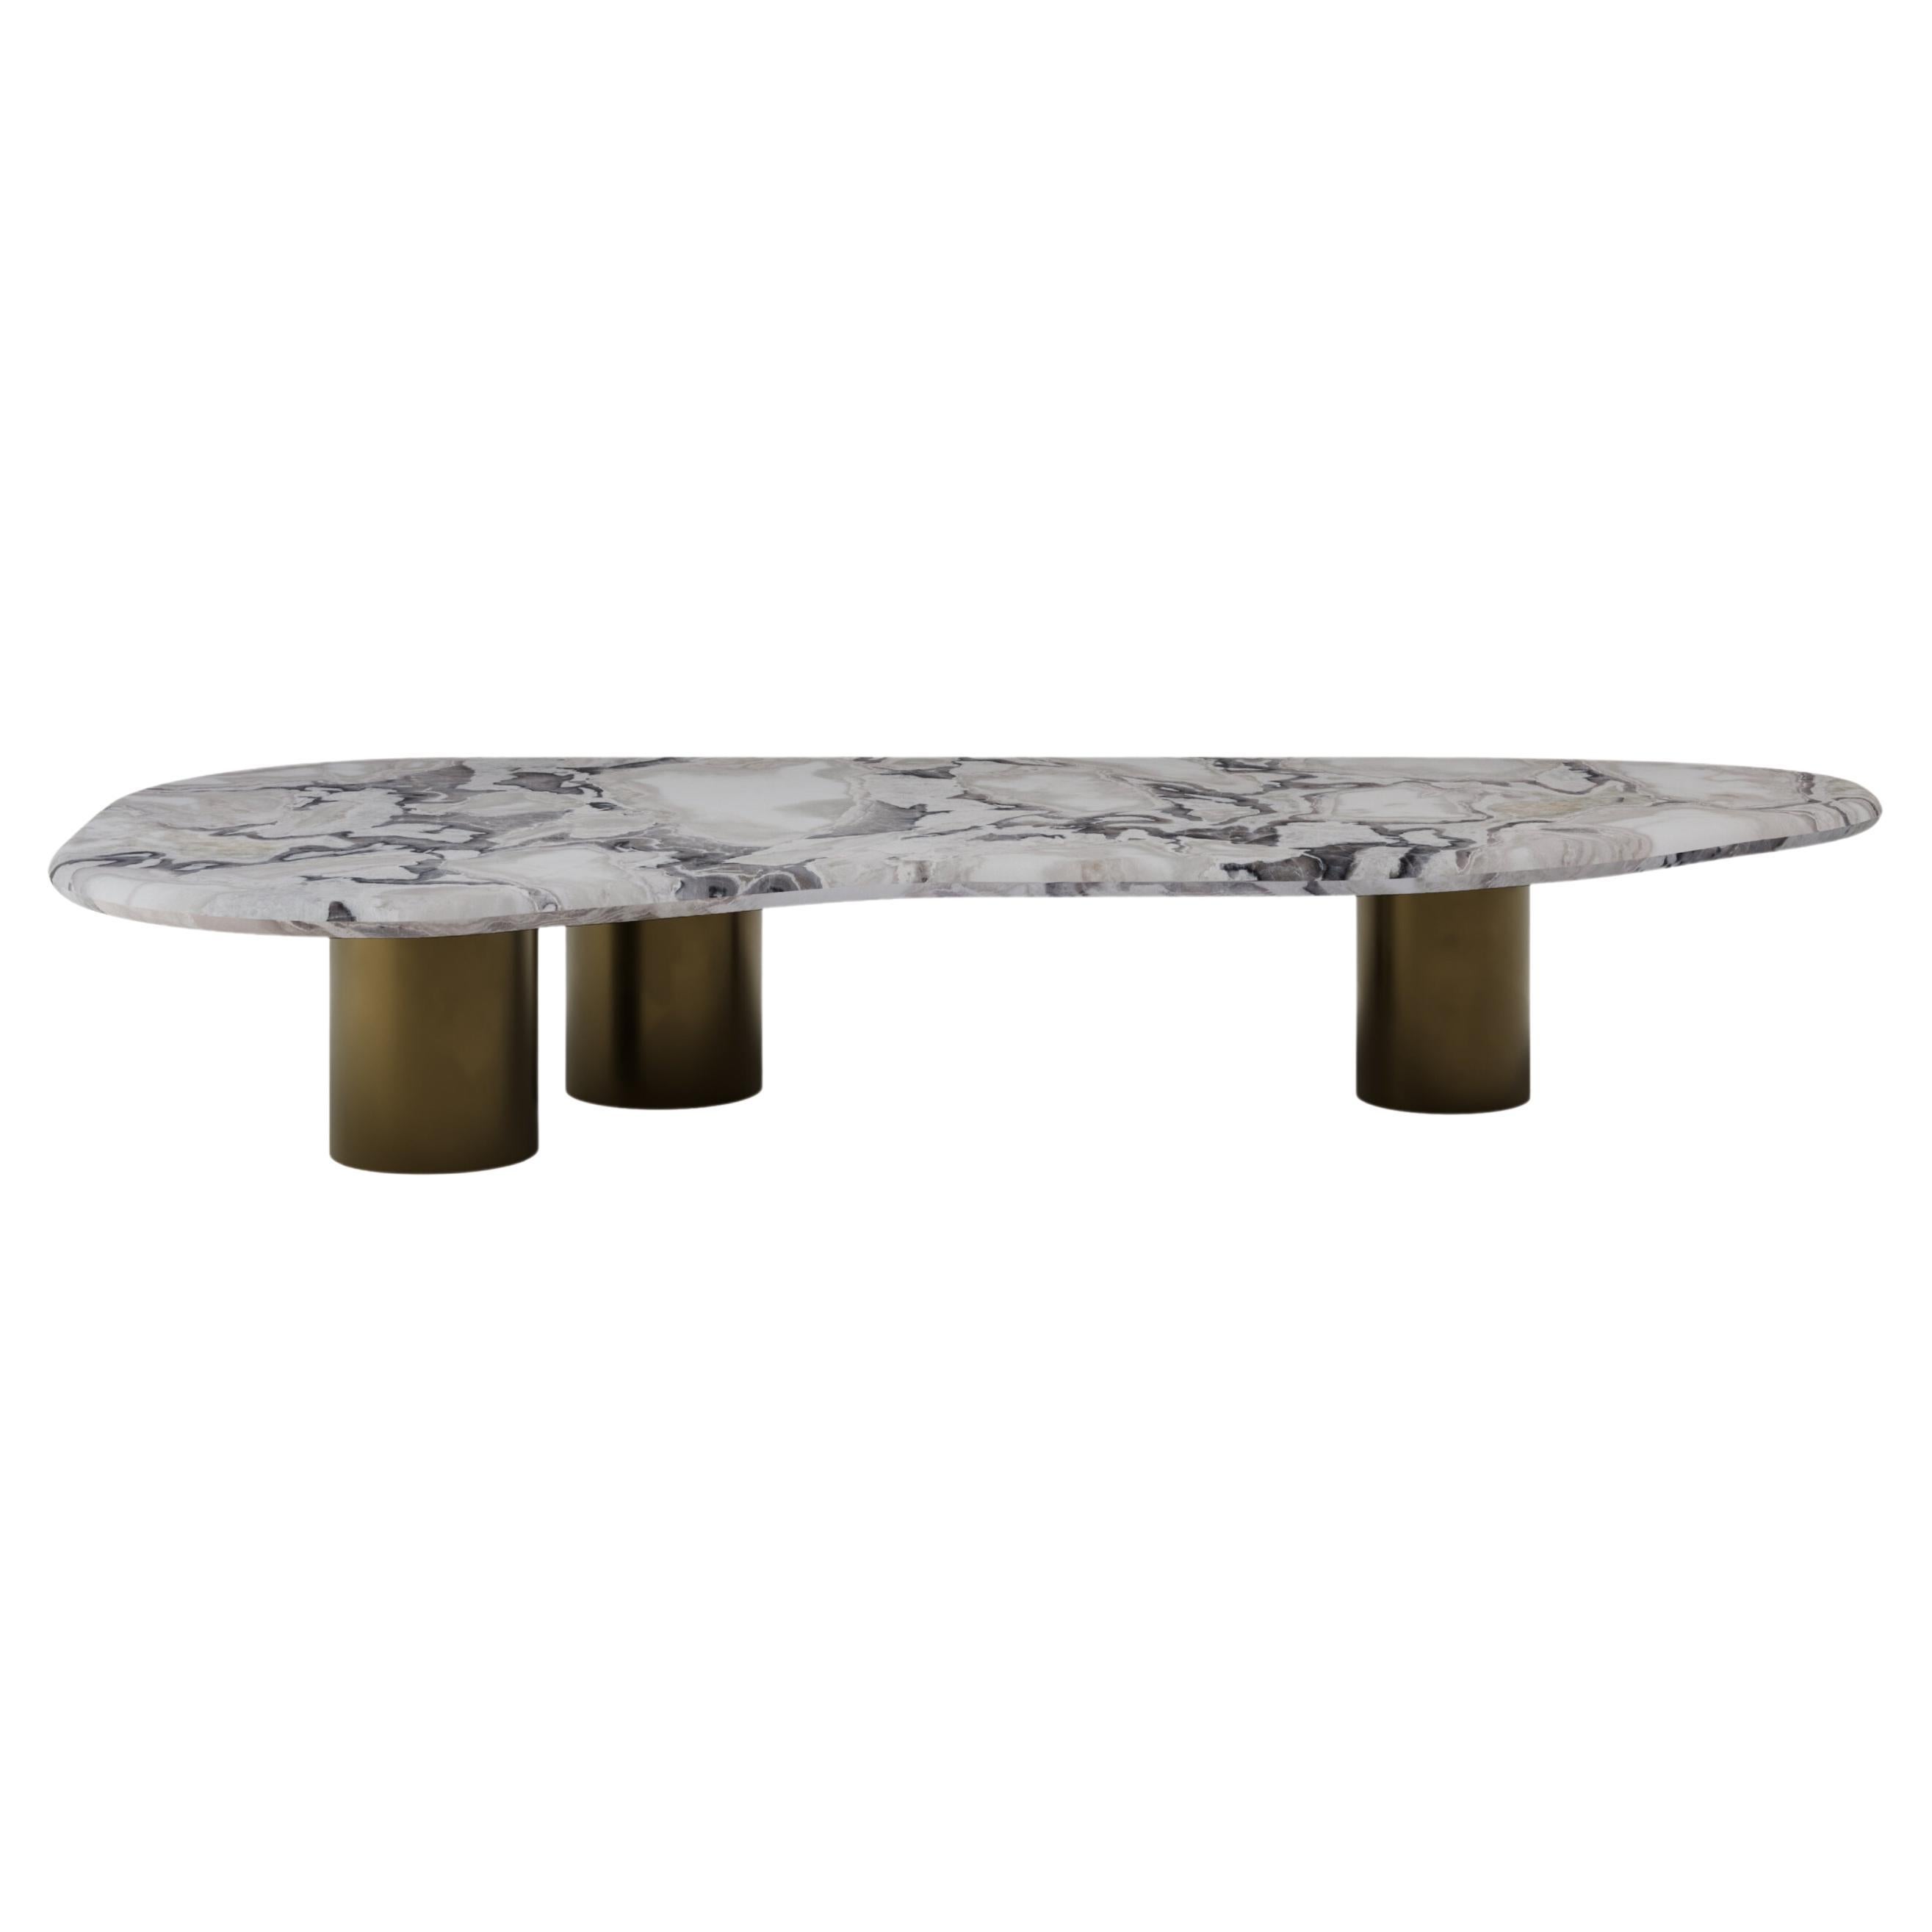 FORM(LA) Lago Freeform Coffee Table 72”L x 36”W x 12”H Oyster Marble & Bronze For Sale